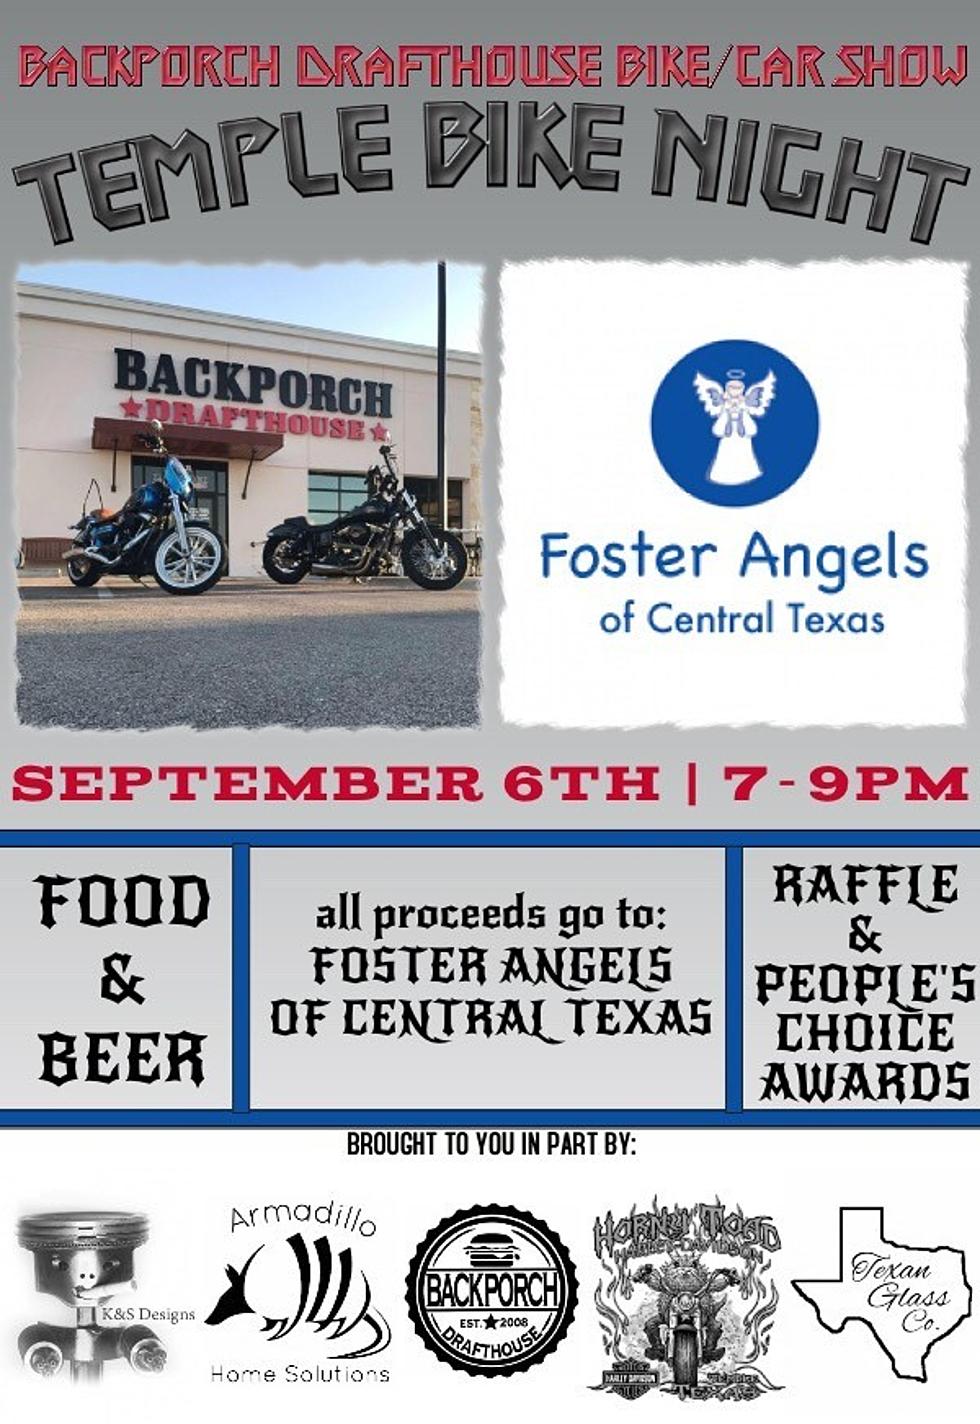 Temple Bike Night proceeds benefit Foster Angels of Central Texas!